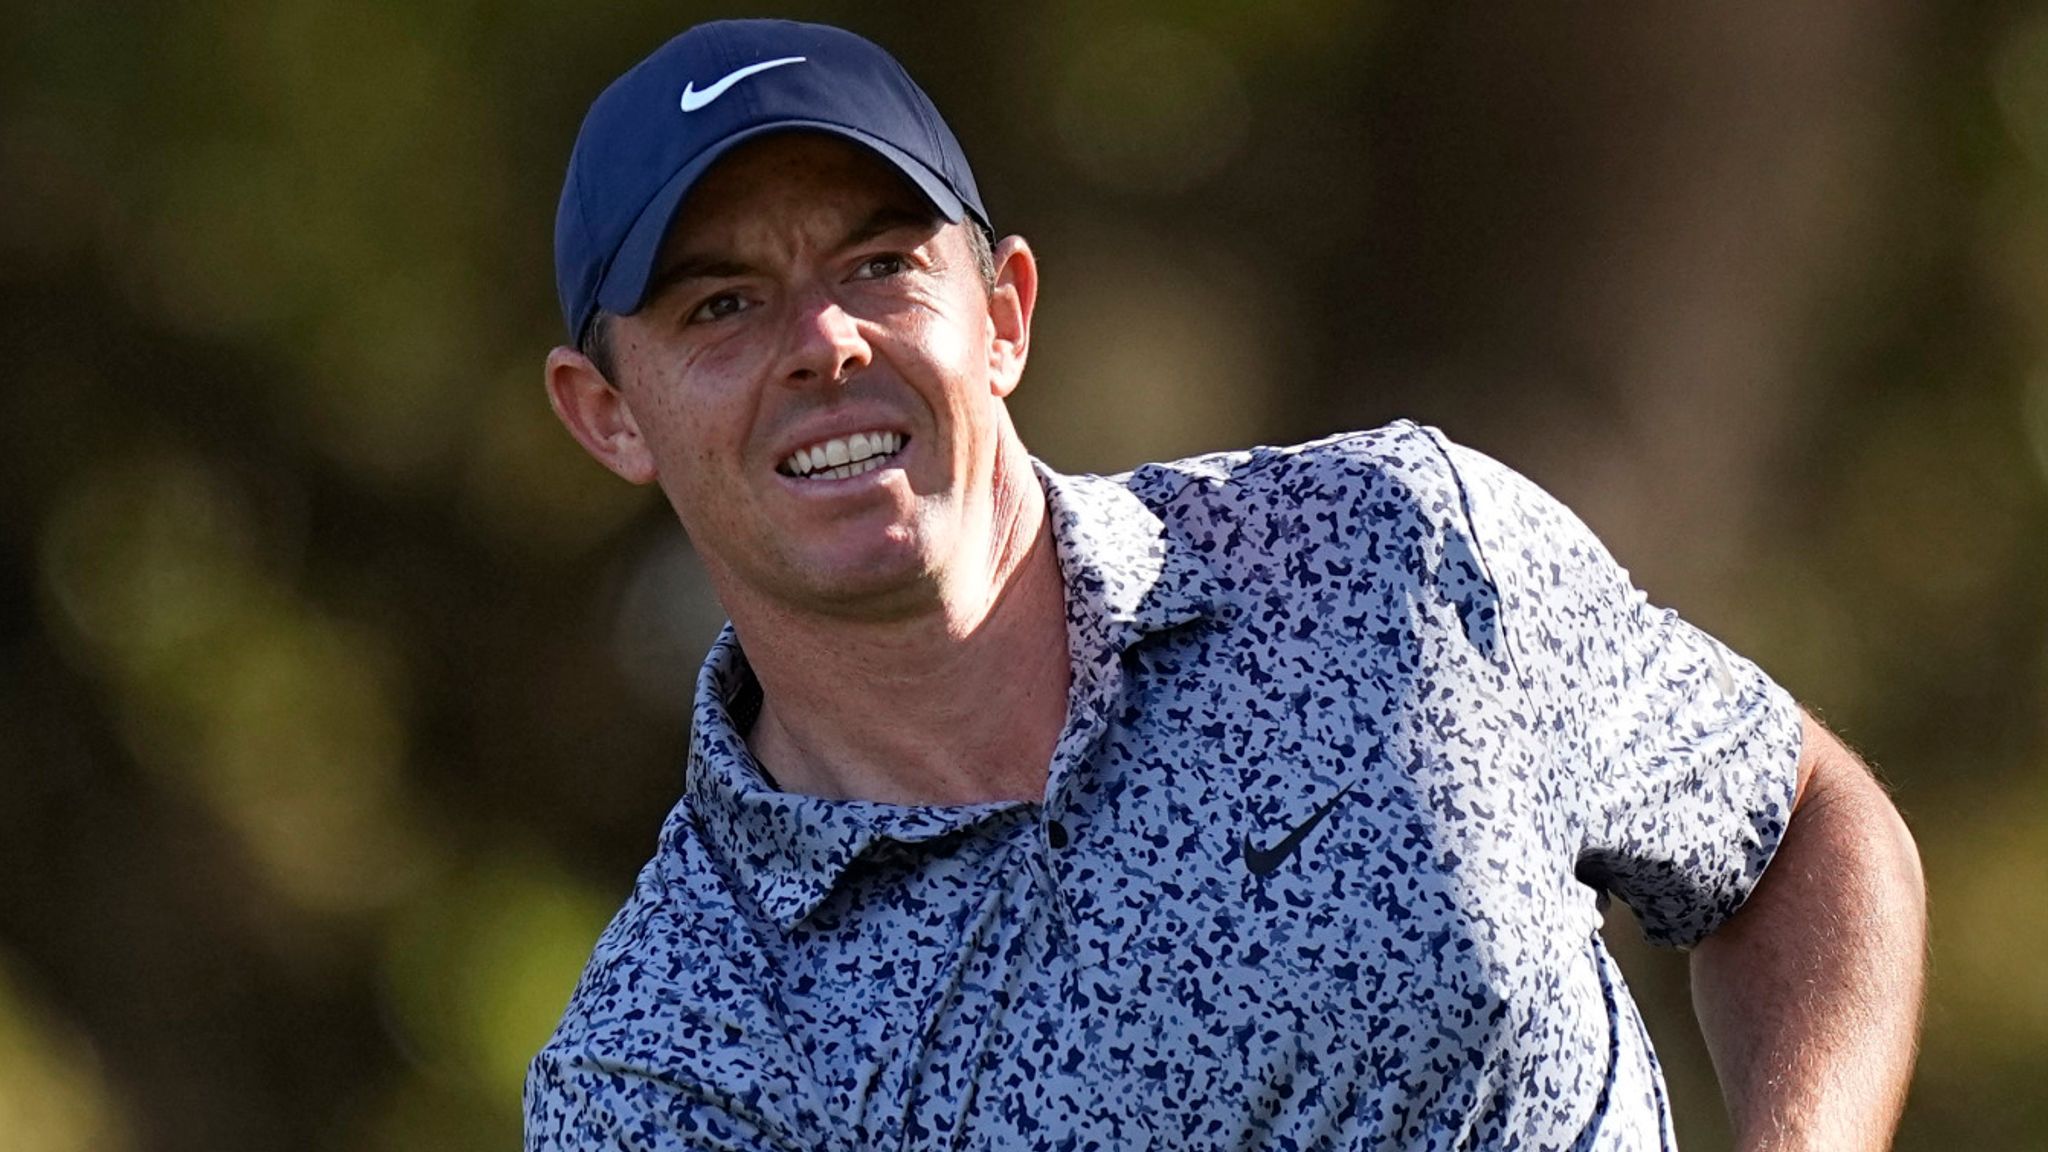 Rory McIlroy qualifies for WGC-Dell Technologies Match Play semi-finals after Xander Schauffele nail-biter Golf News Sky Sports